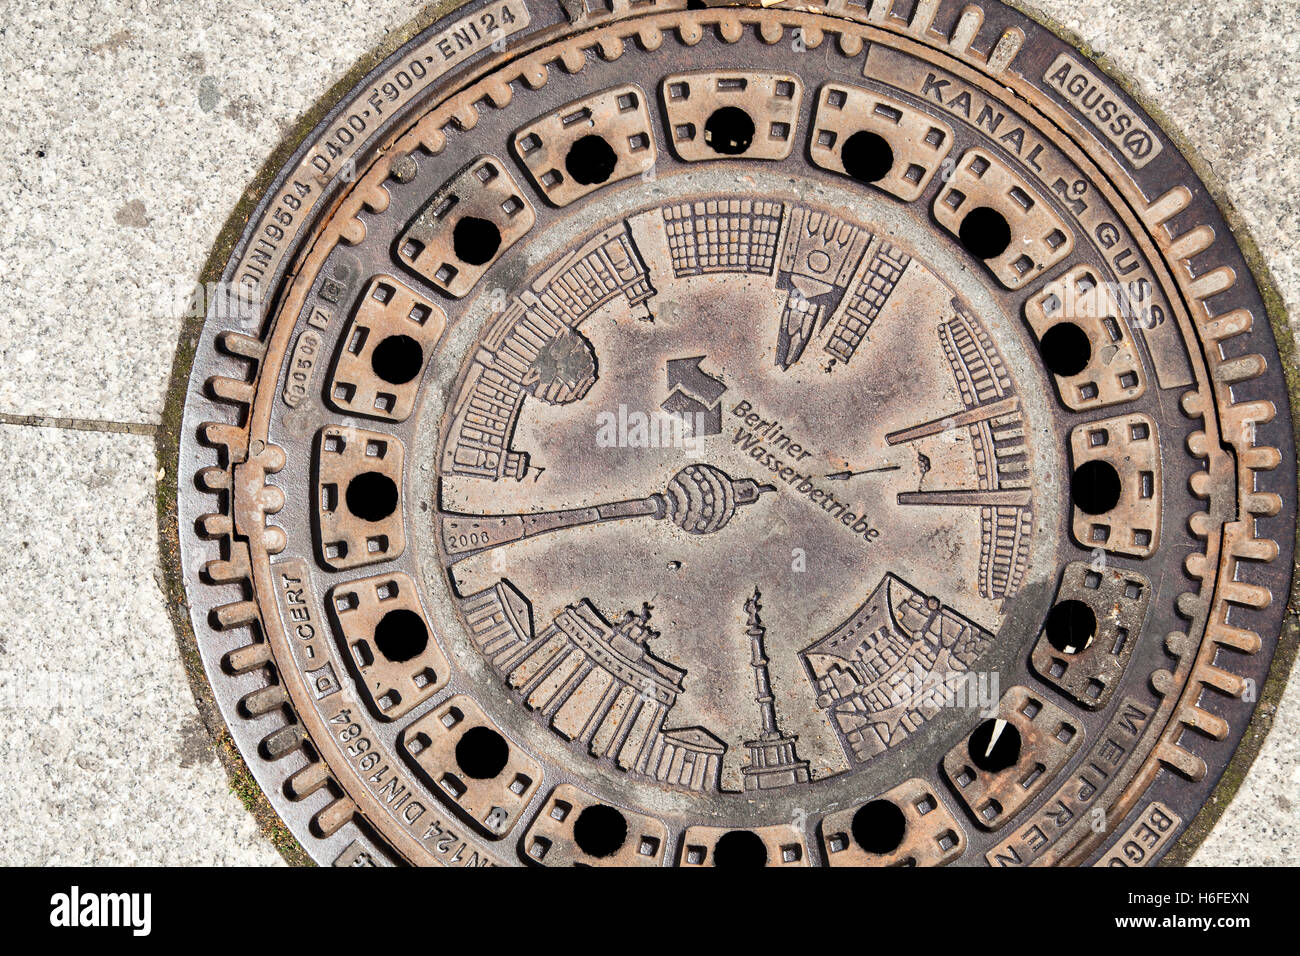 Berlin sewer cover in a street's pavement. Stock Photo